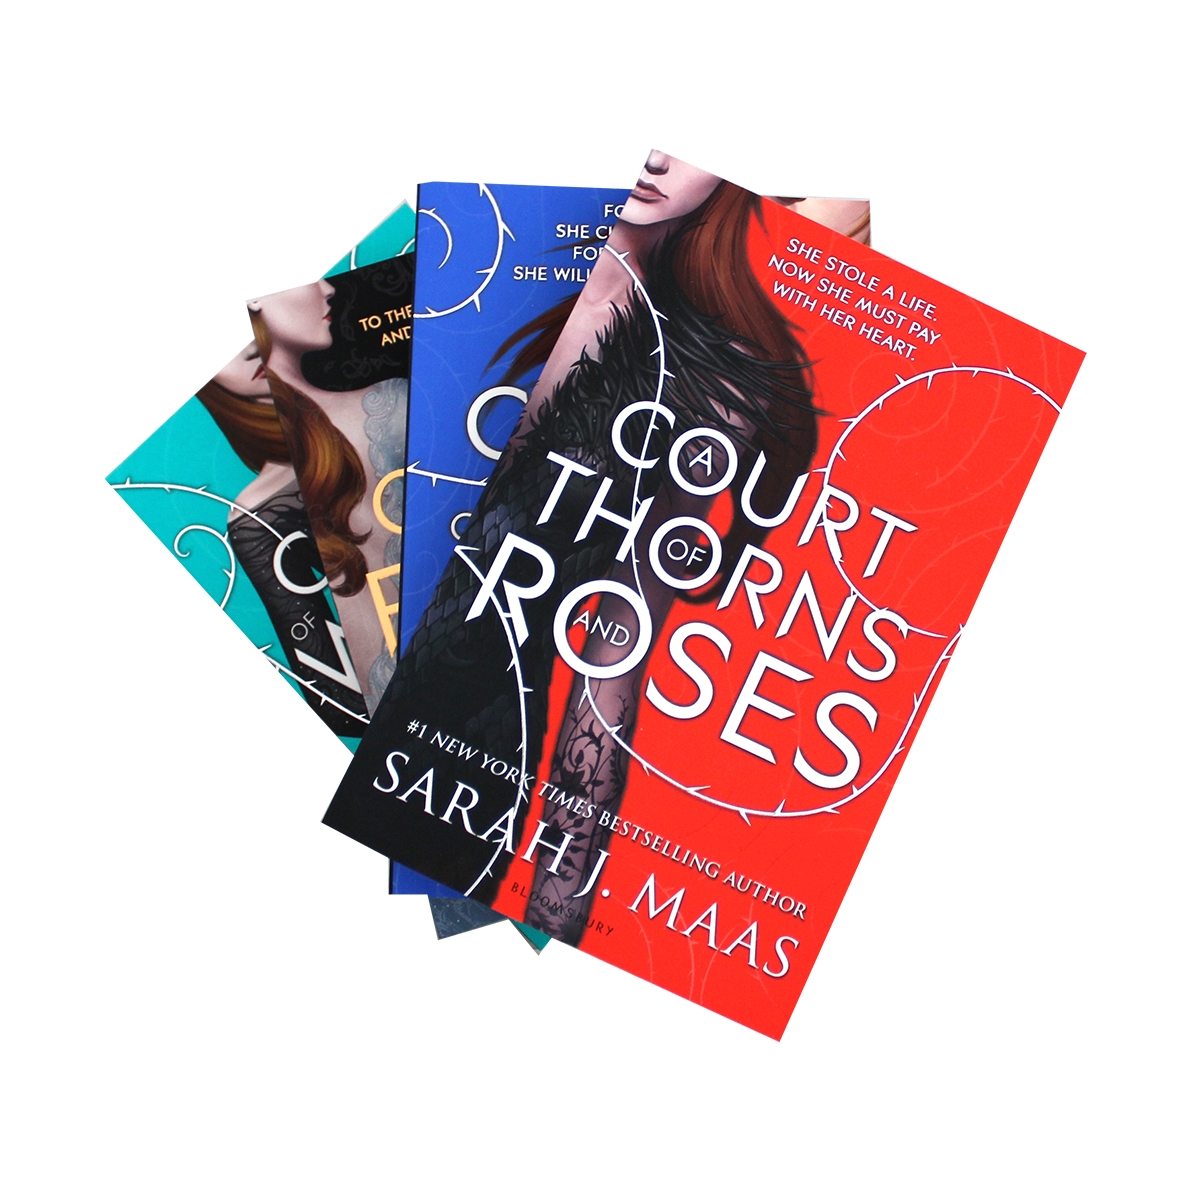 a court of thorns and roses book 6